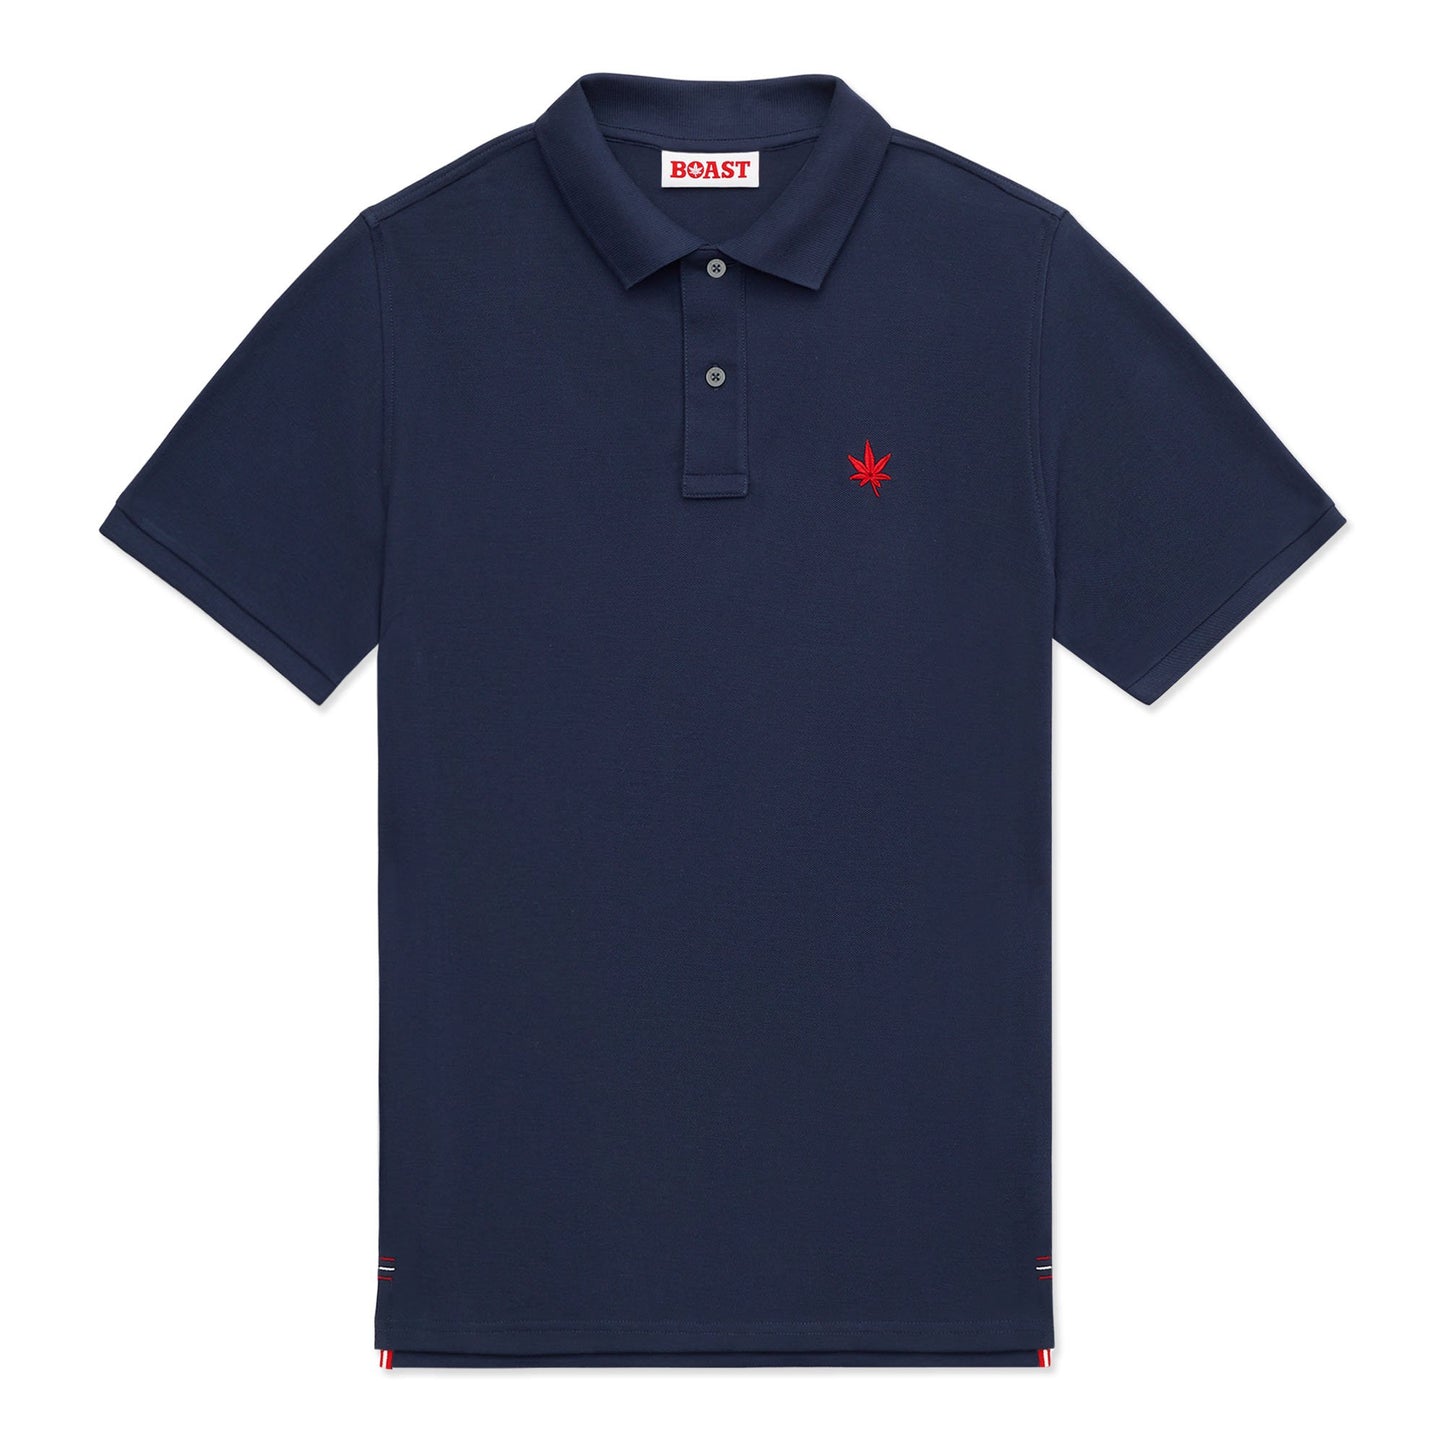 Navy polo with red embroidered leaf on the left chest.